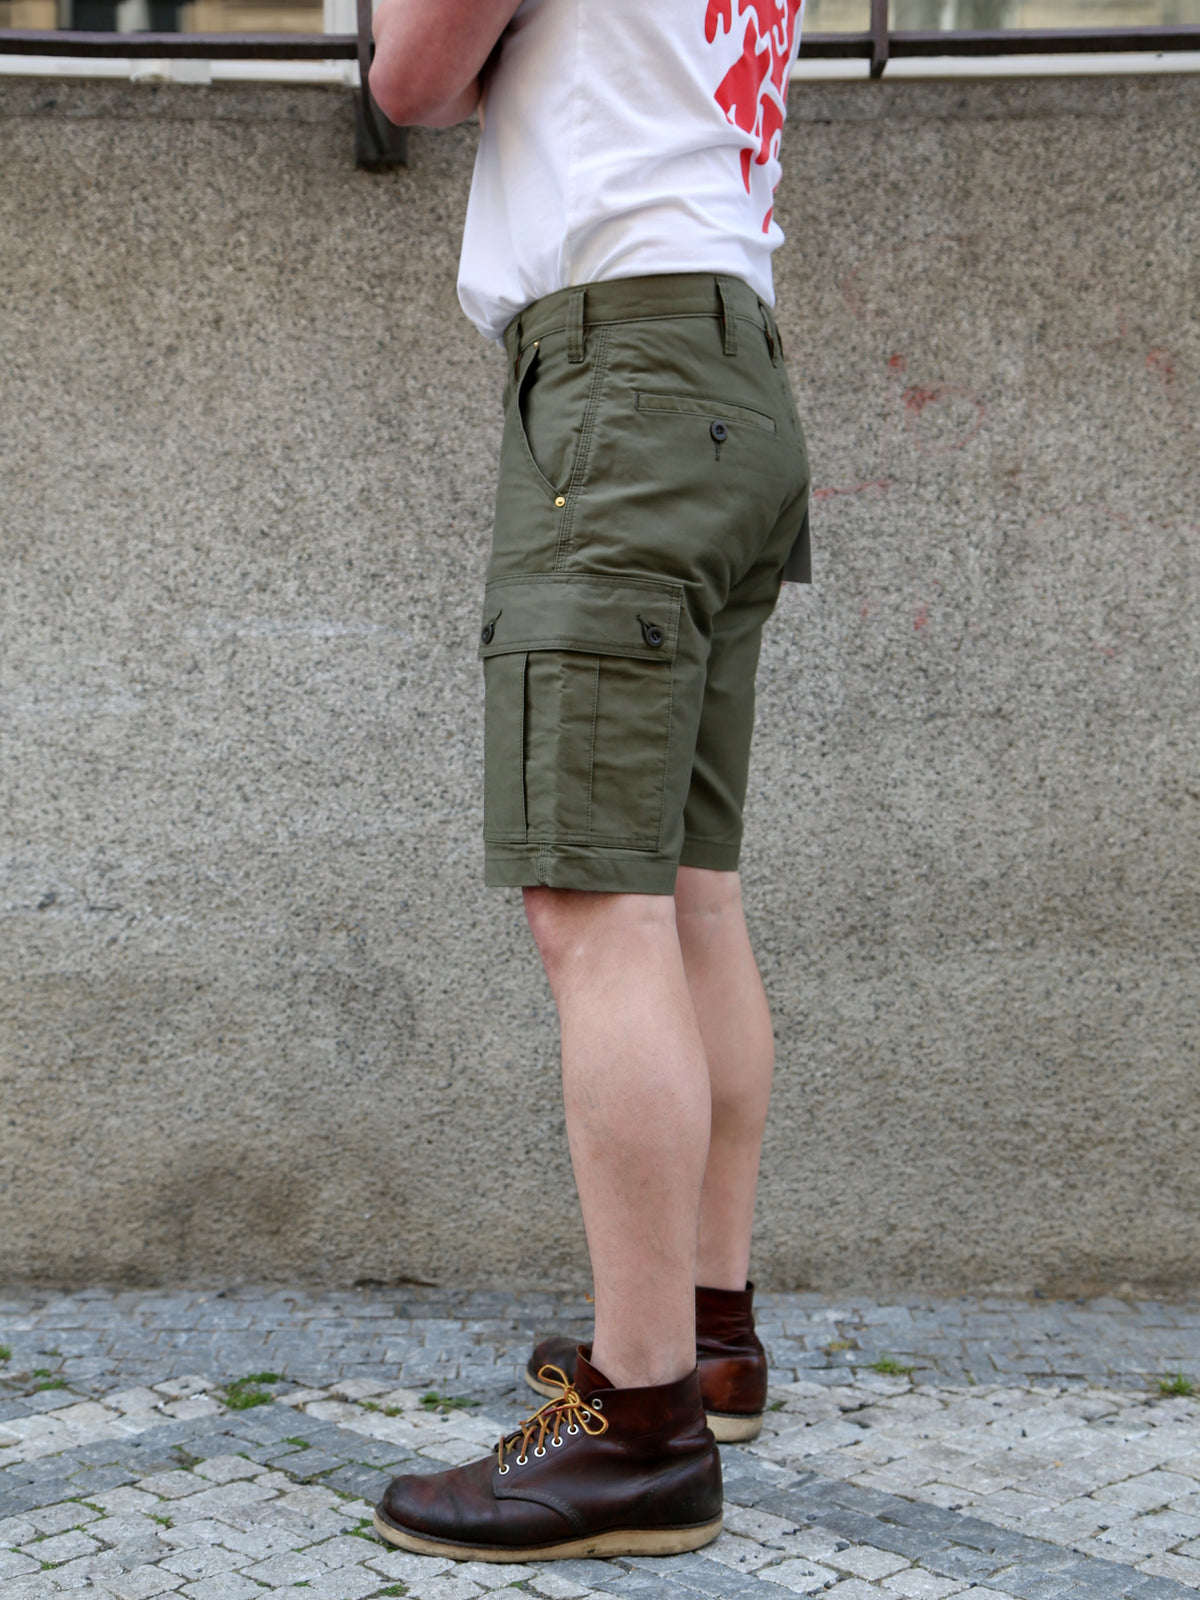 Iron Heart IH-726-OLV 7.4oz Cotton Whipcord Camp Shorts - Olive